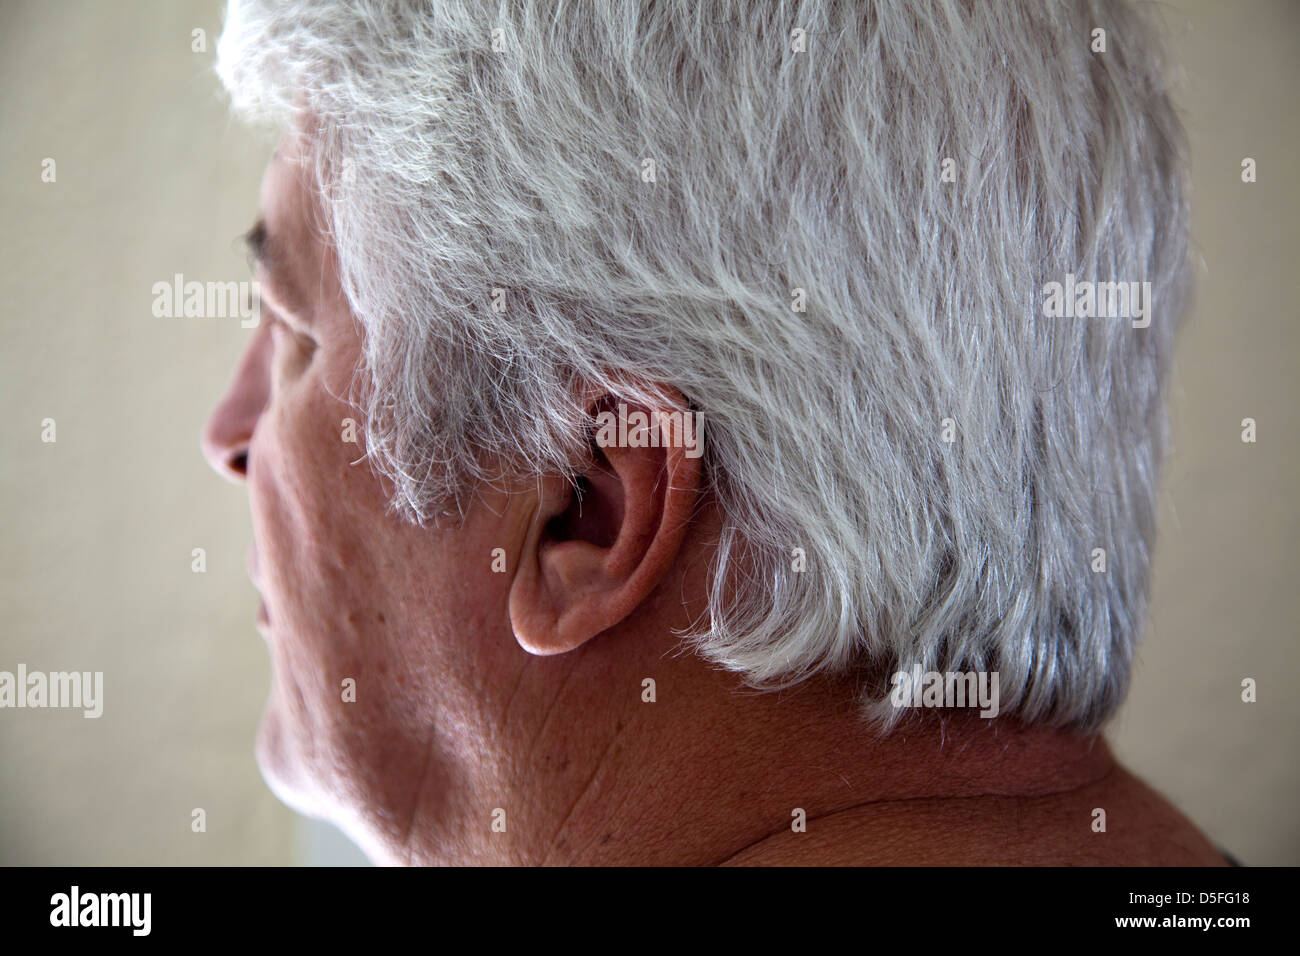 Man With Silver Hair Stock Photo